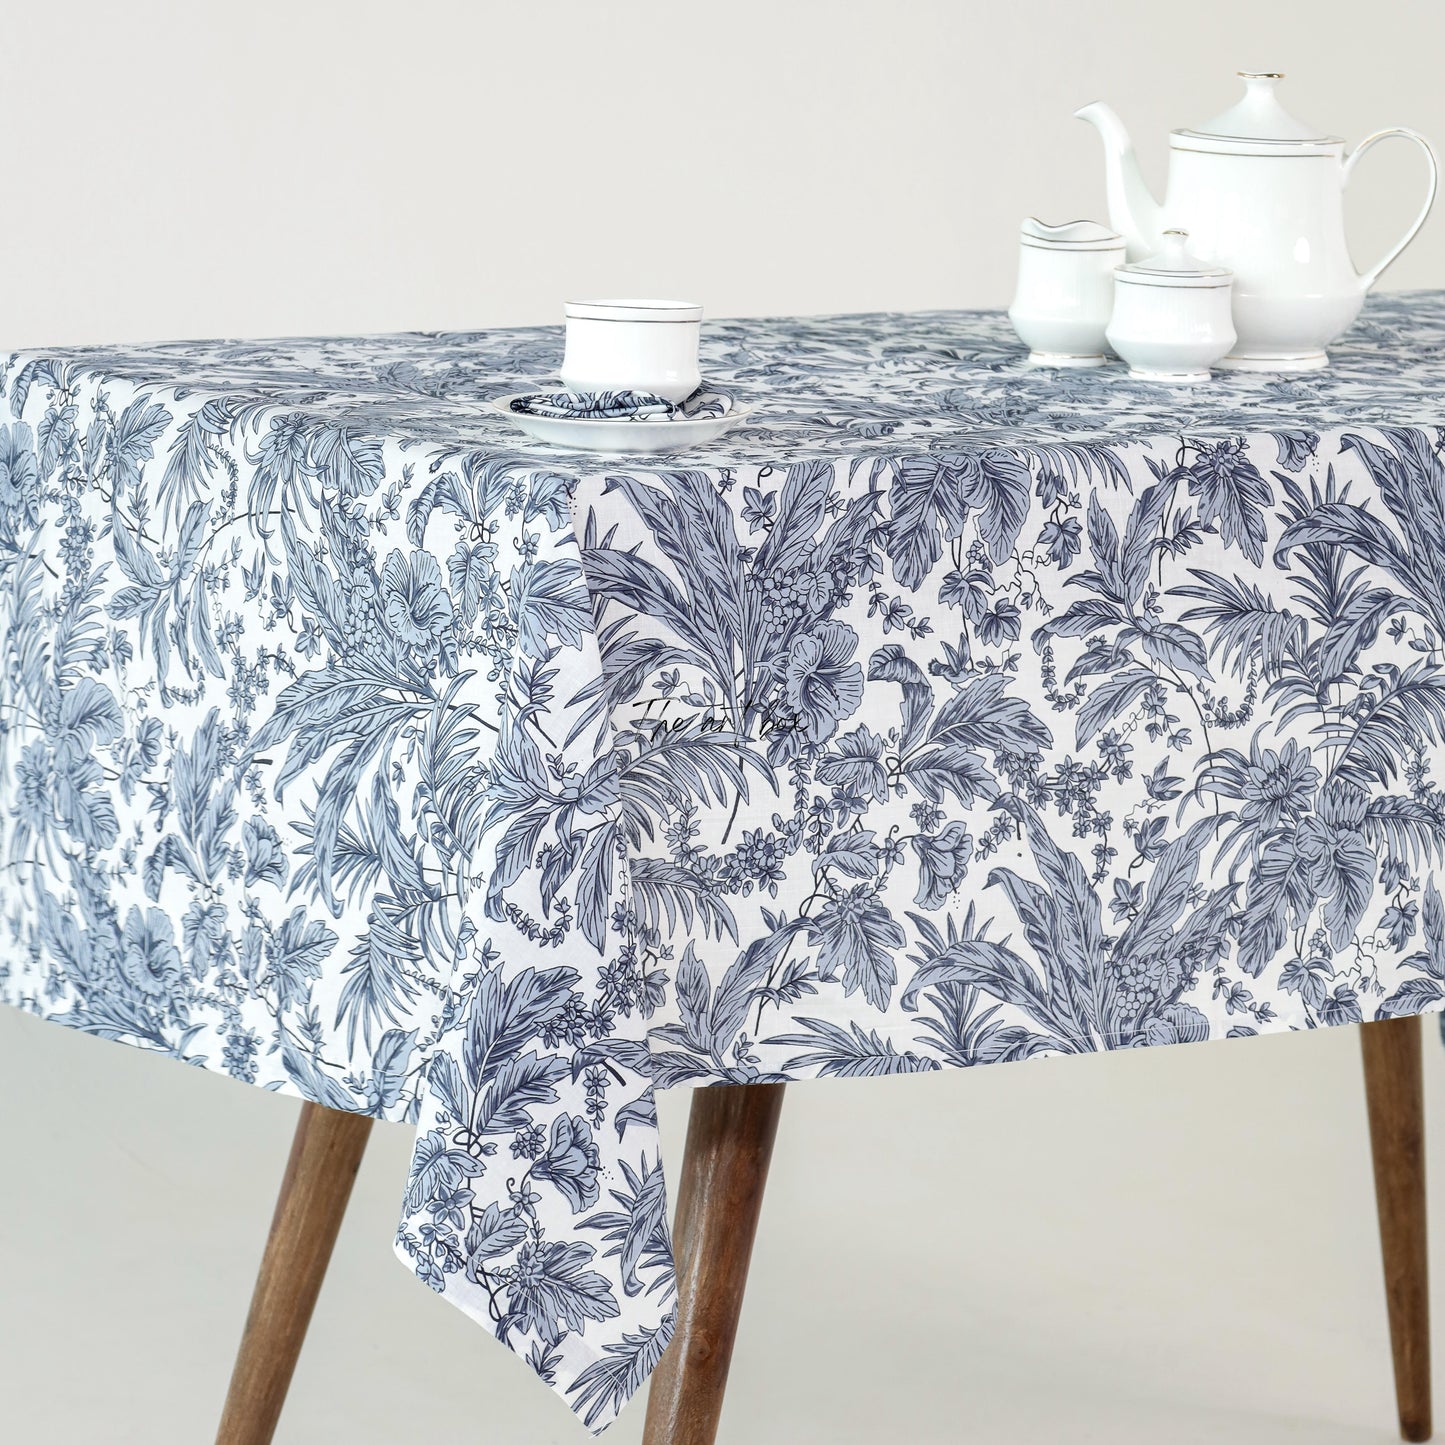 Washable Rectangle Tablecloth Floral Printed Cotton Table Cover